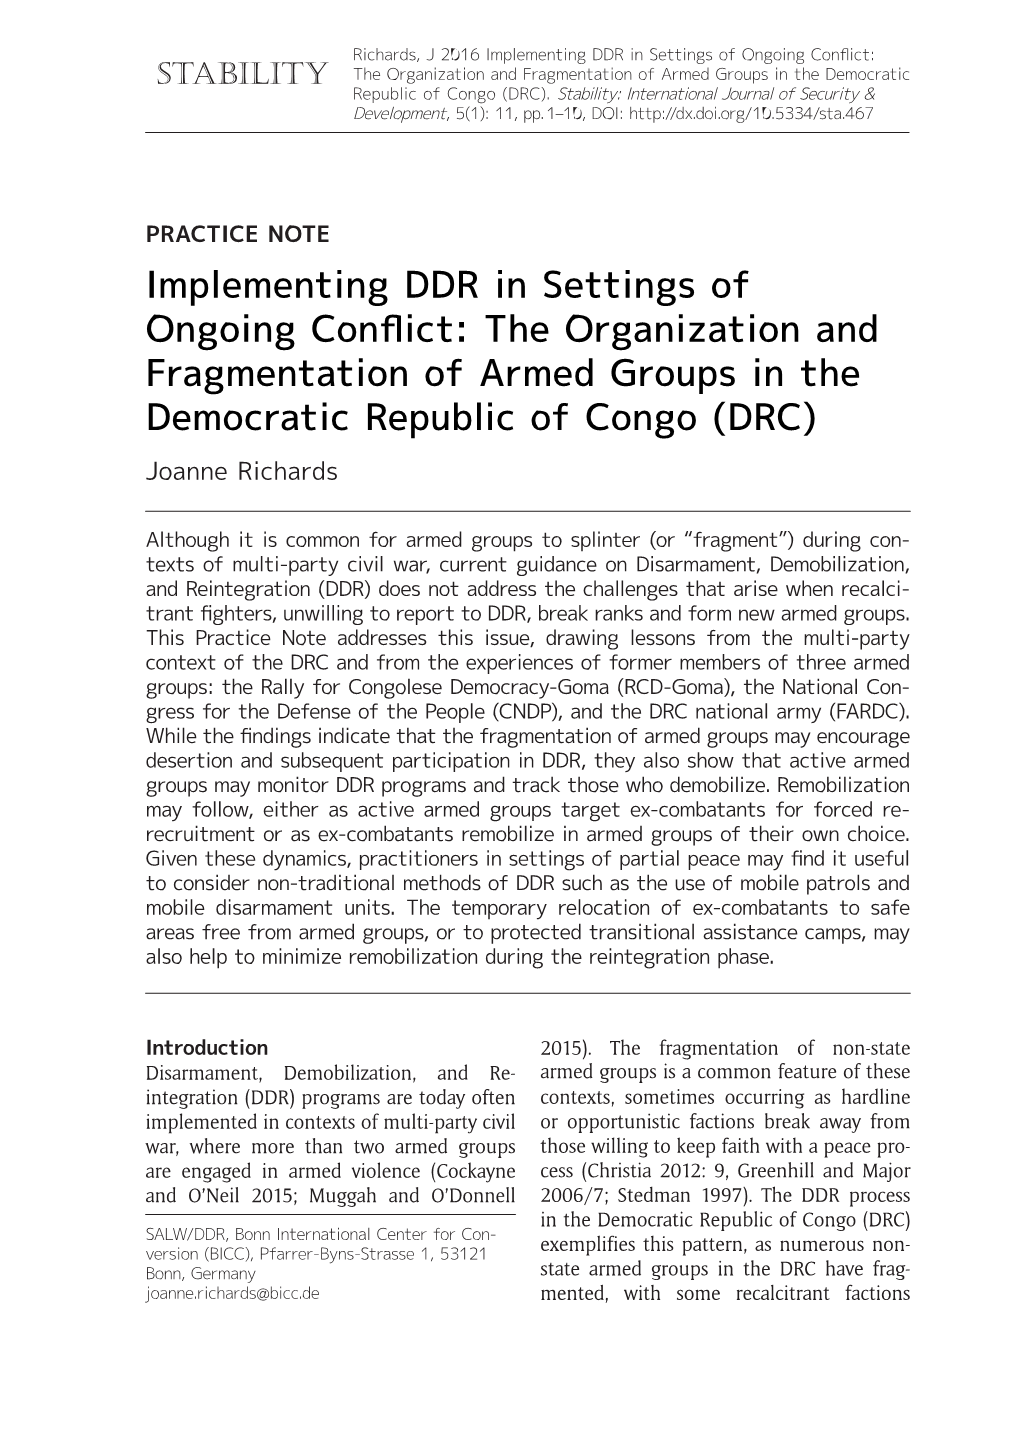 The Organization and Fragmentation of Armed Groups in the Democratic Republic of Congo (DRC)